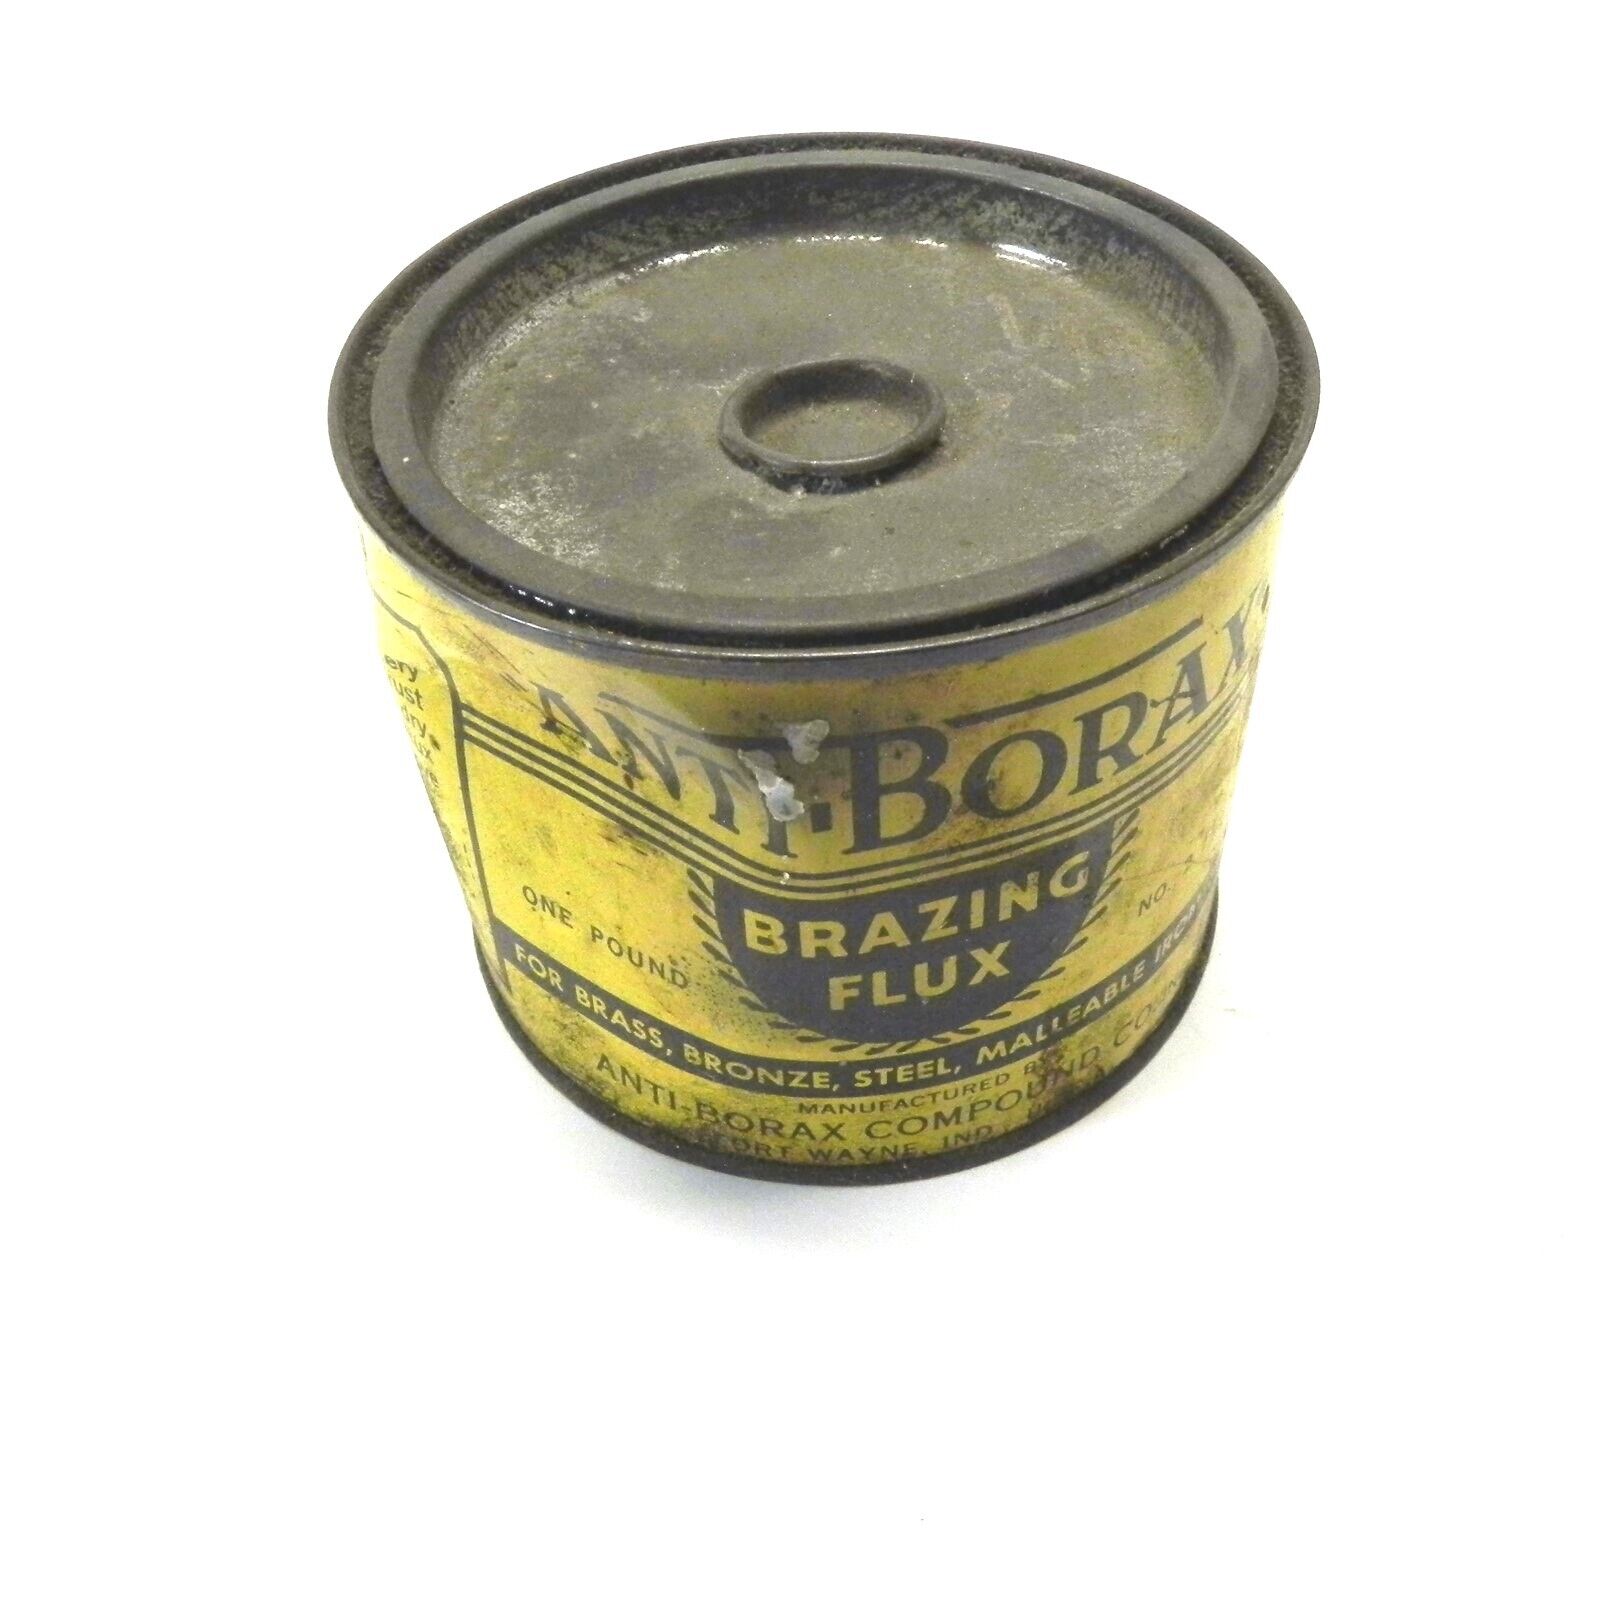 ANTI BORAX BRAZING FLUX CAN 1 LB CAN DRIED CONTENTS HALF FULL VINTAGE YELLOW CAN